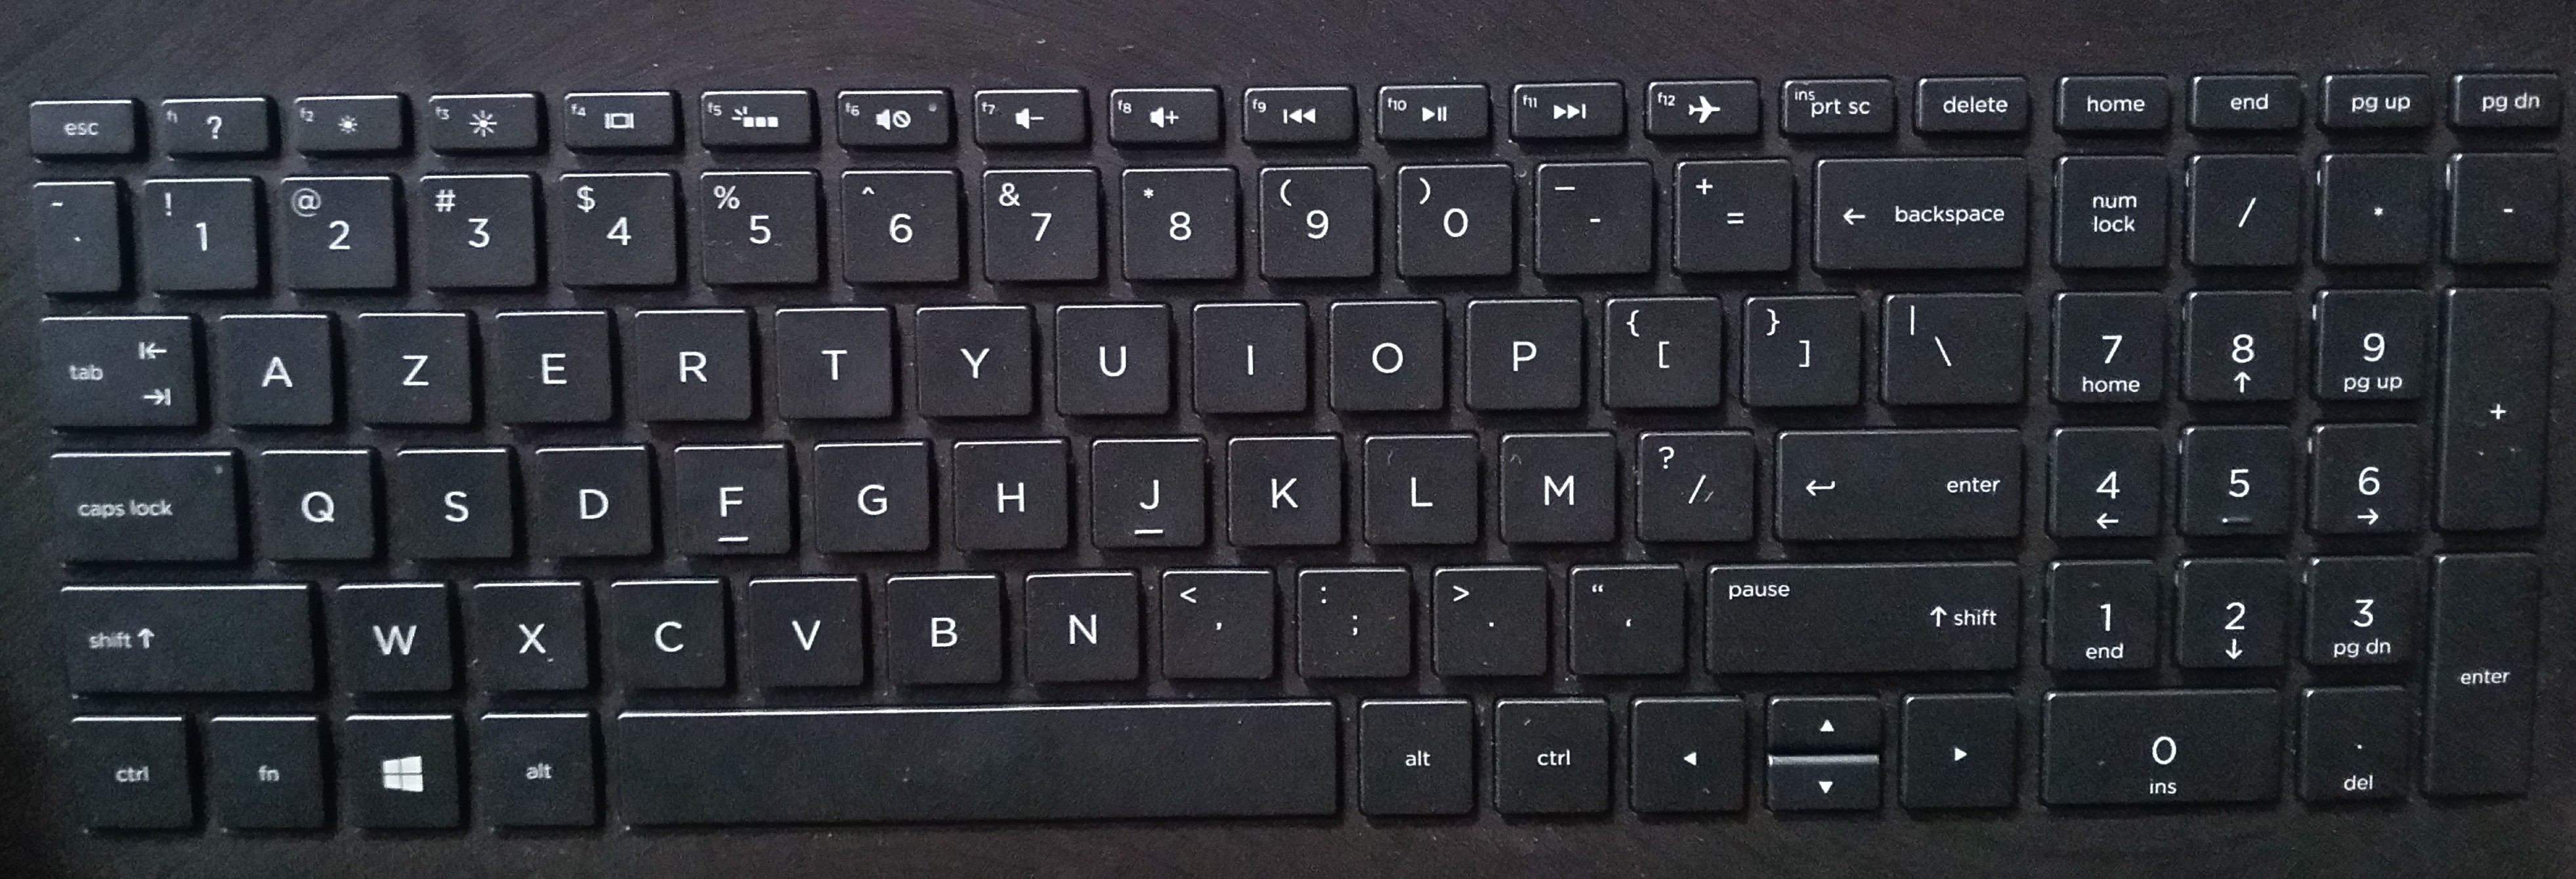 solved-keyboard-layout-page-2-hp-support-community-6999937